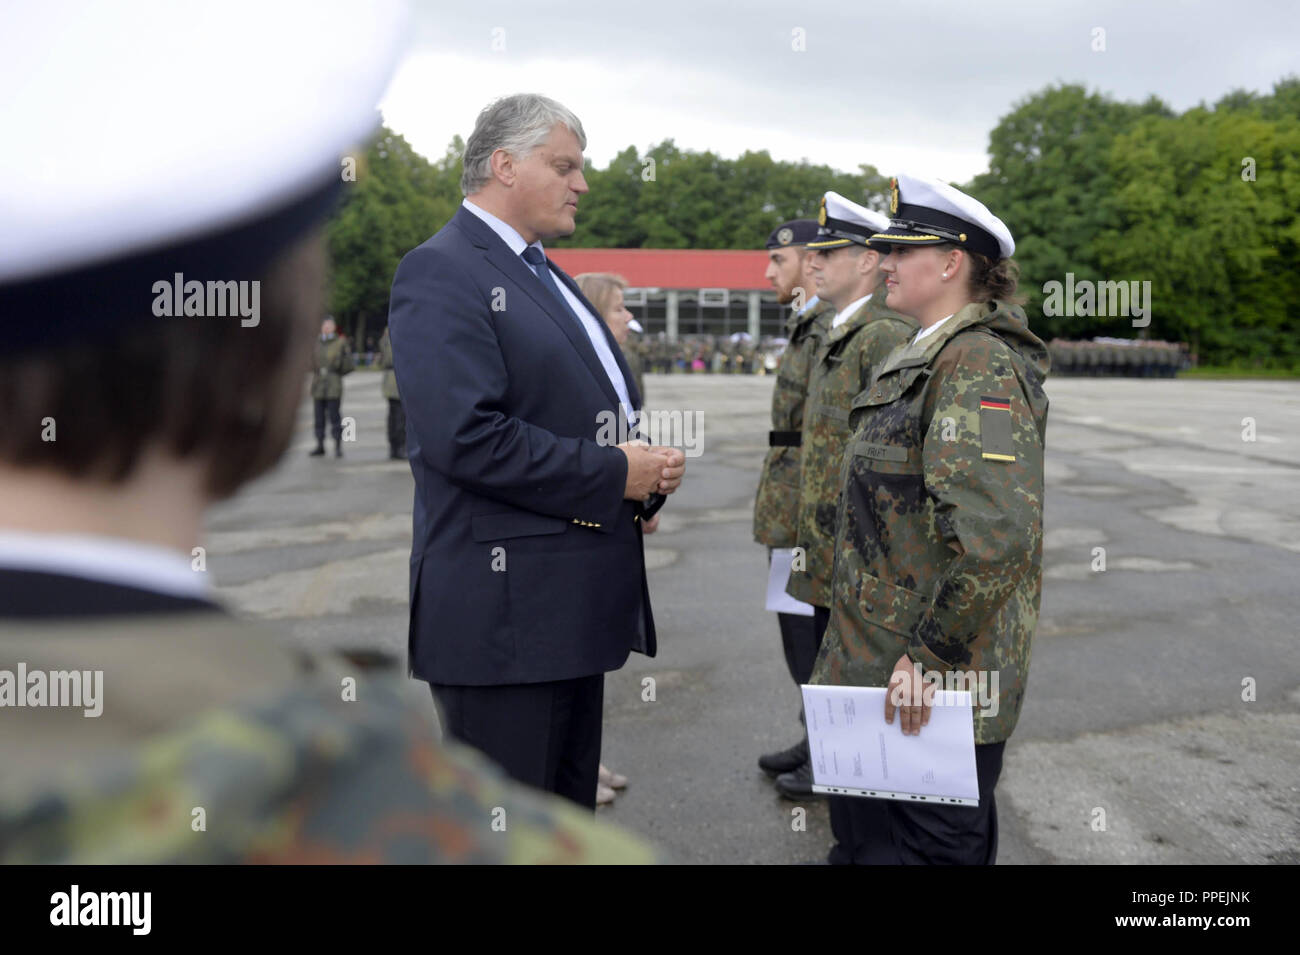 Officials of the Bundeswehr during the solemn roll call on the Open Door Day at the University of the Bundeswehr in Neubiberg. In the picture, Markus Gruebel, Parliamentary State Secretary at the Federal Ministry of Defence, congratulates soldiers on their promotion. Stock Photo